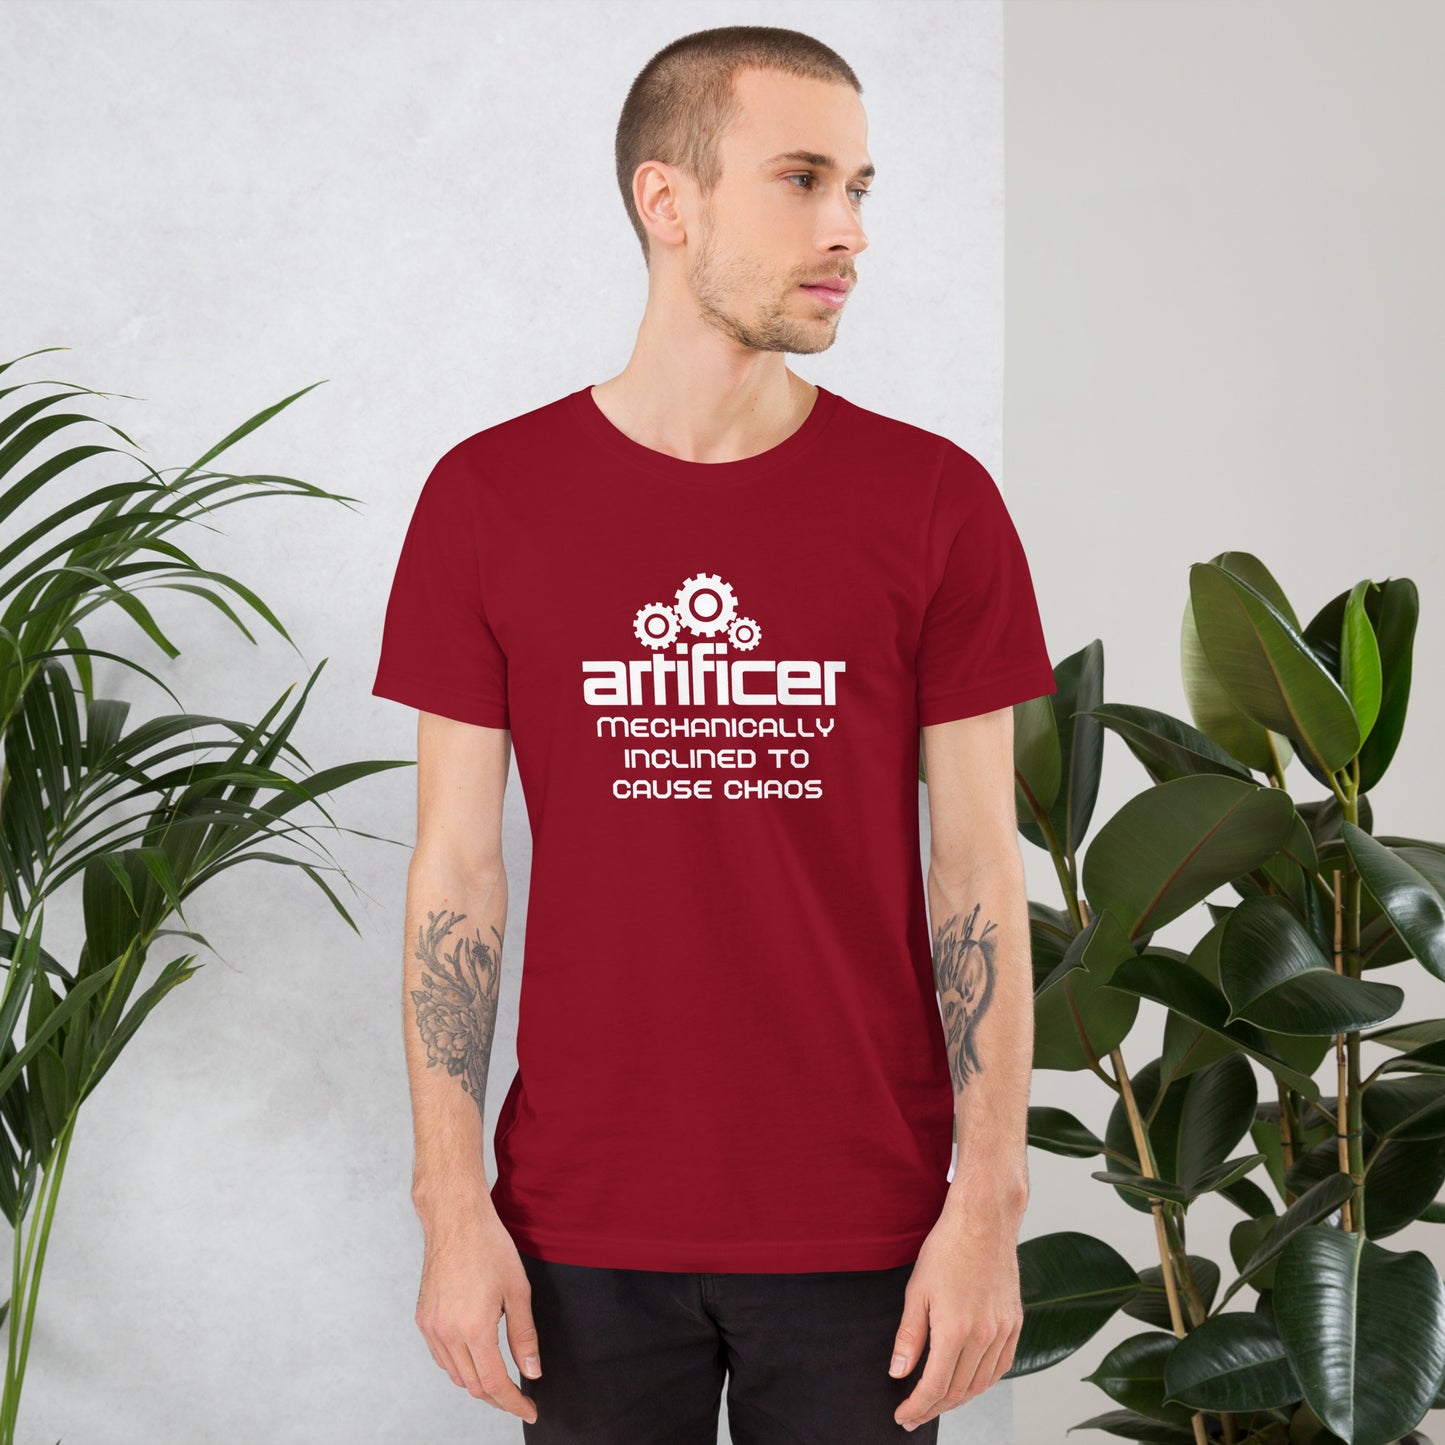 Mechanically inclined to cause chaos - Artificer D&D Unisex t-shirt